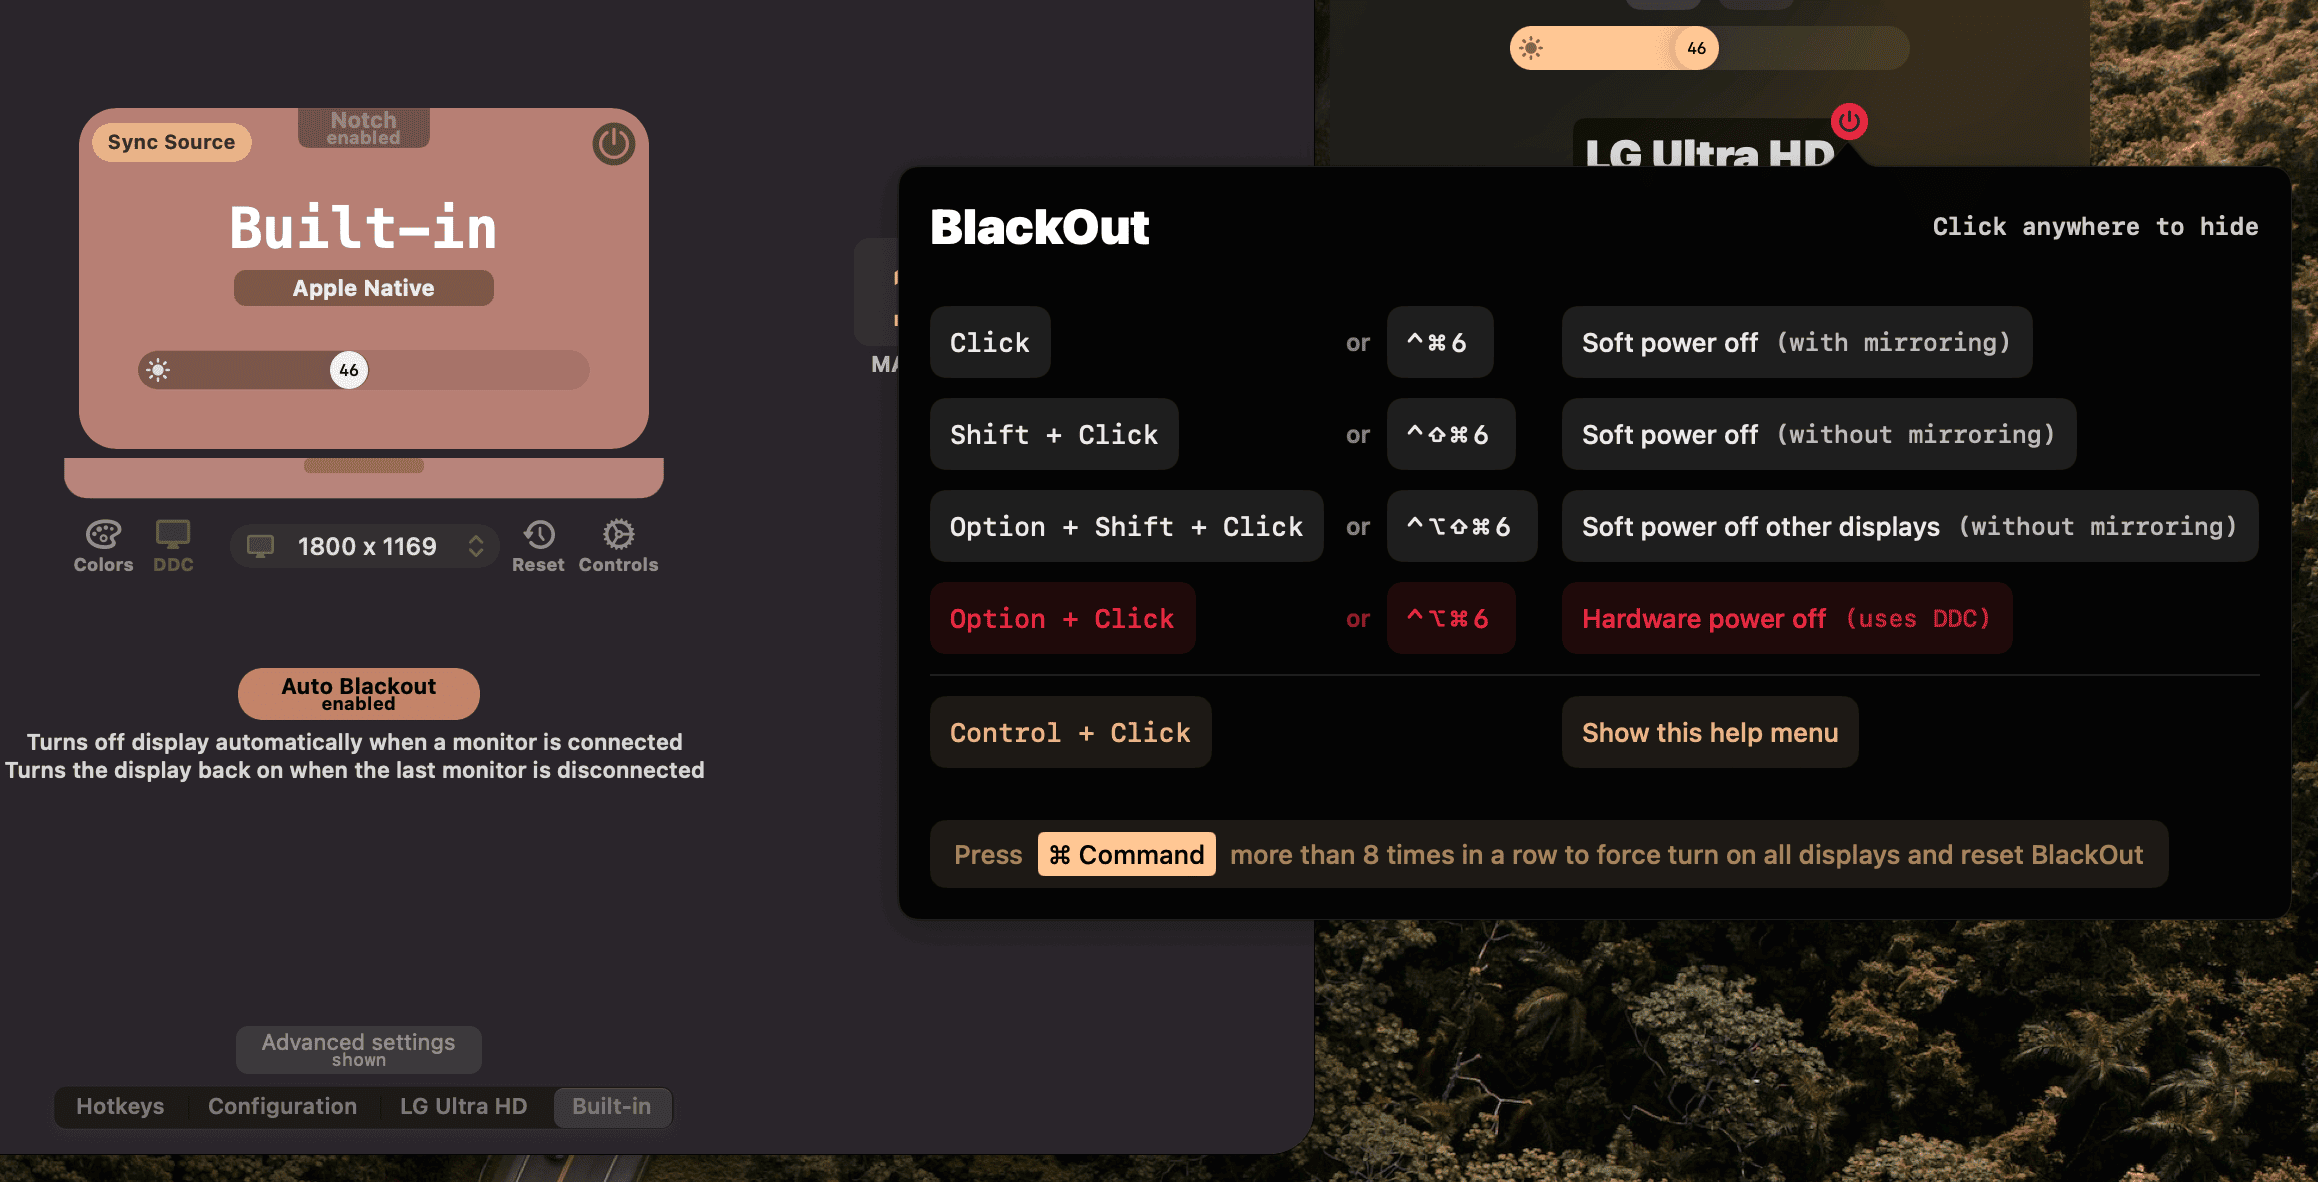 Lunar interface showing the BlackOut function